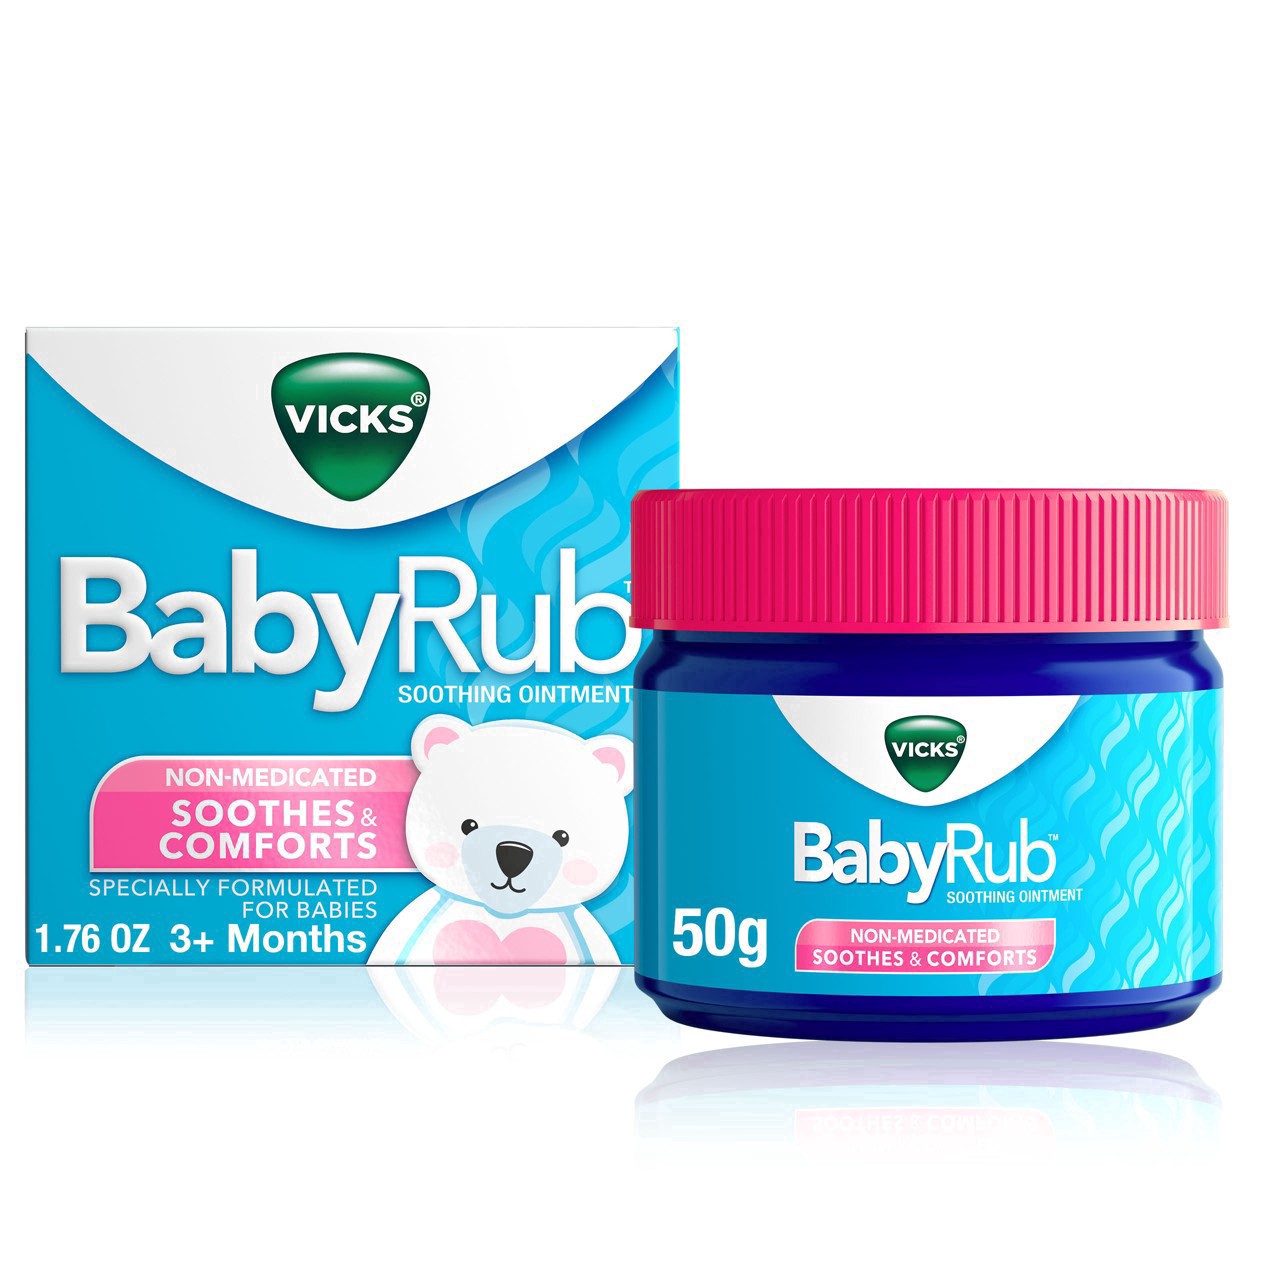 slide 55 of 78, Vicks BabyRub, Chest Rub Ointment with Soothing Aloe, Eucalyptus, Lavender, and Rosemary, from The Makers of VapoRub, 1.76 oz, 1.76 oz